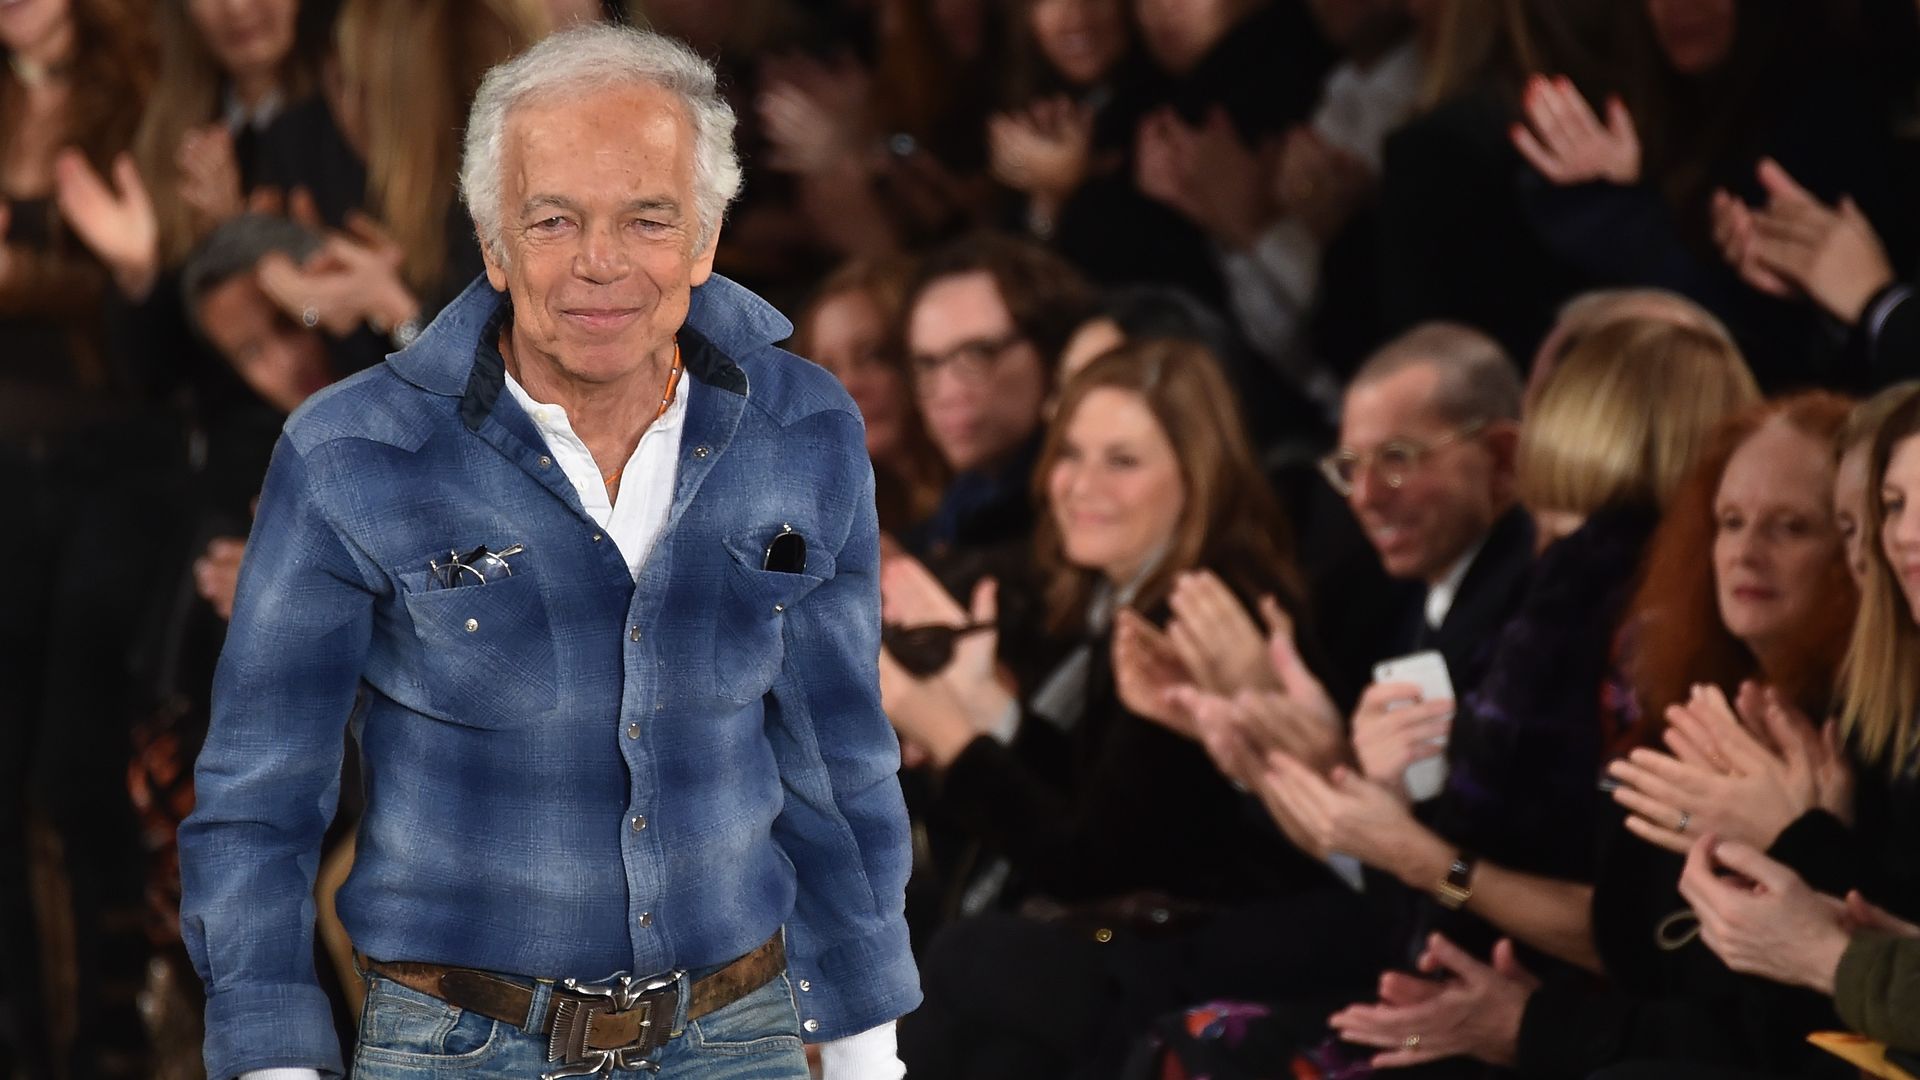 NEW YORK, NY - FEBRUARY 19:  Designer Ralph Lauren attends the Ralph Lauren fashion show during Mercedes-Benz Fashion Week Fall 2015 at Skylight Clarkson SQ. on February 19, 2015 in New York City.  (Photo by Mike Coppola/Getty Images for Mercedes-Benz Fas